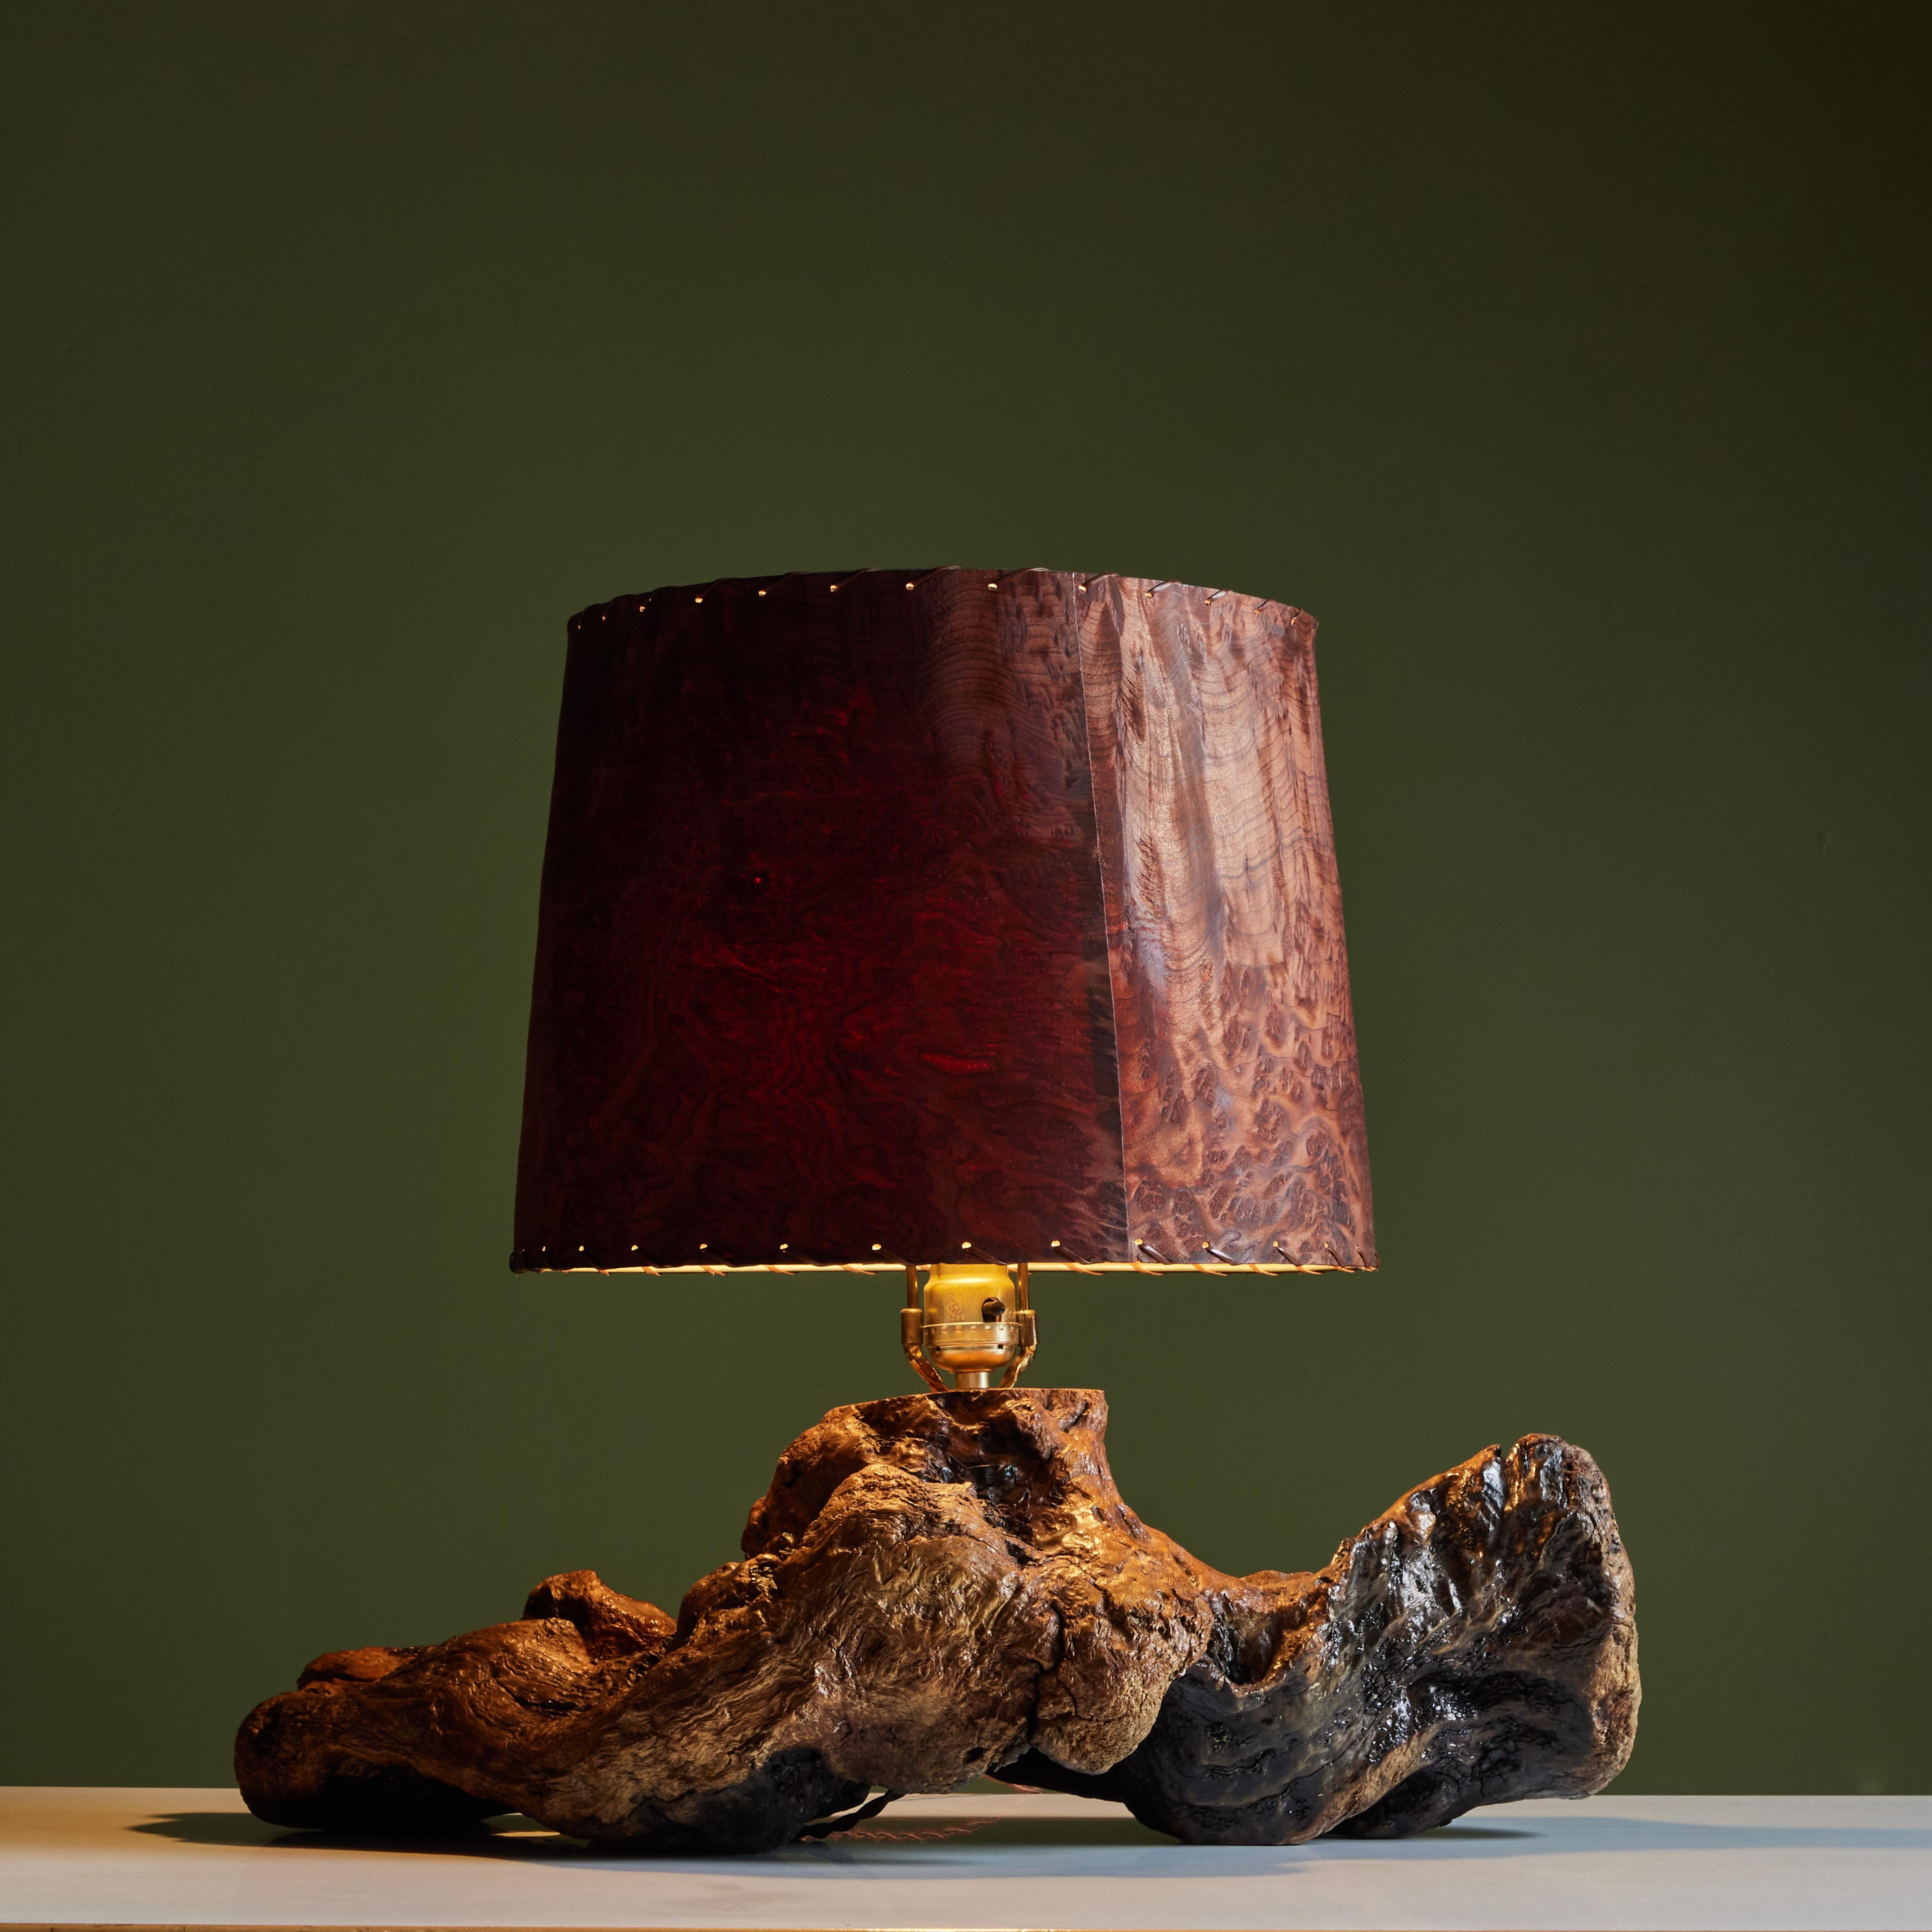 Live edge burl wood table lamp in the style George Nakashima. This studio craft lamp features a thick walnut burl base with a burl wood veneer shade and laced detail around the rim of the shade.

Dimensions
23.5